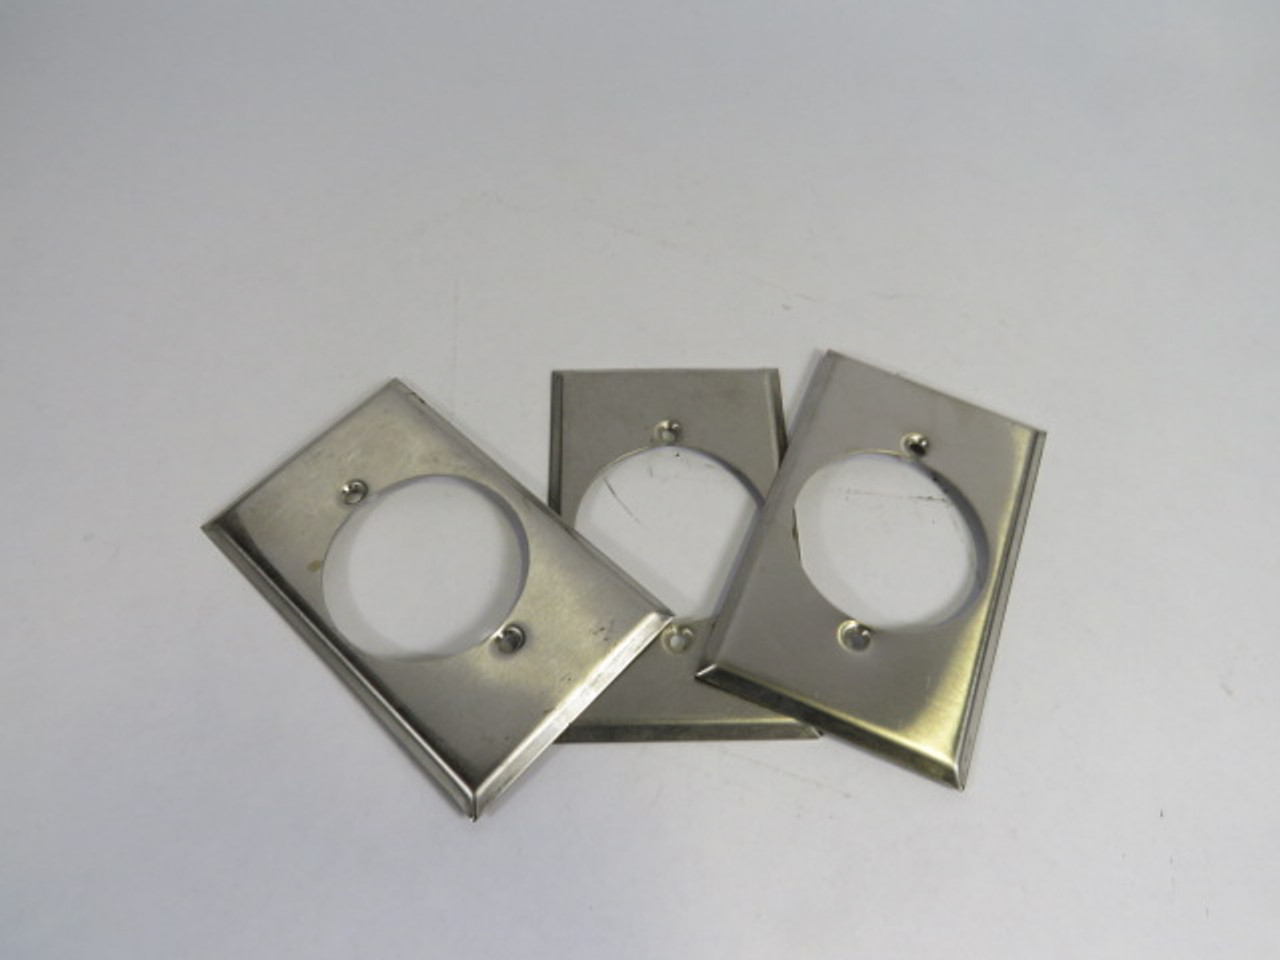 Generic Type 301 1-Gang Stainless Steel Wall Plate 2-1/8" Hole Lot of 3 USED